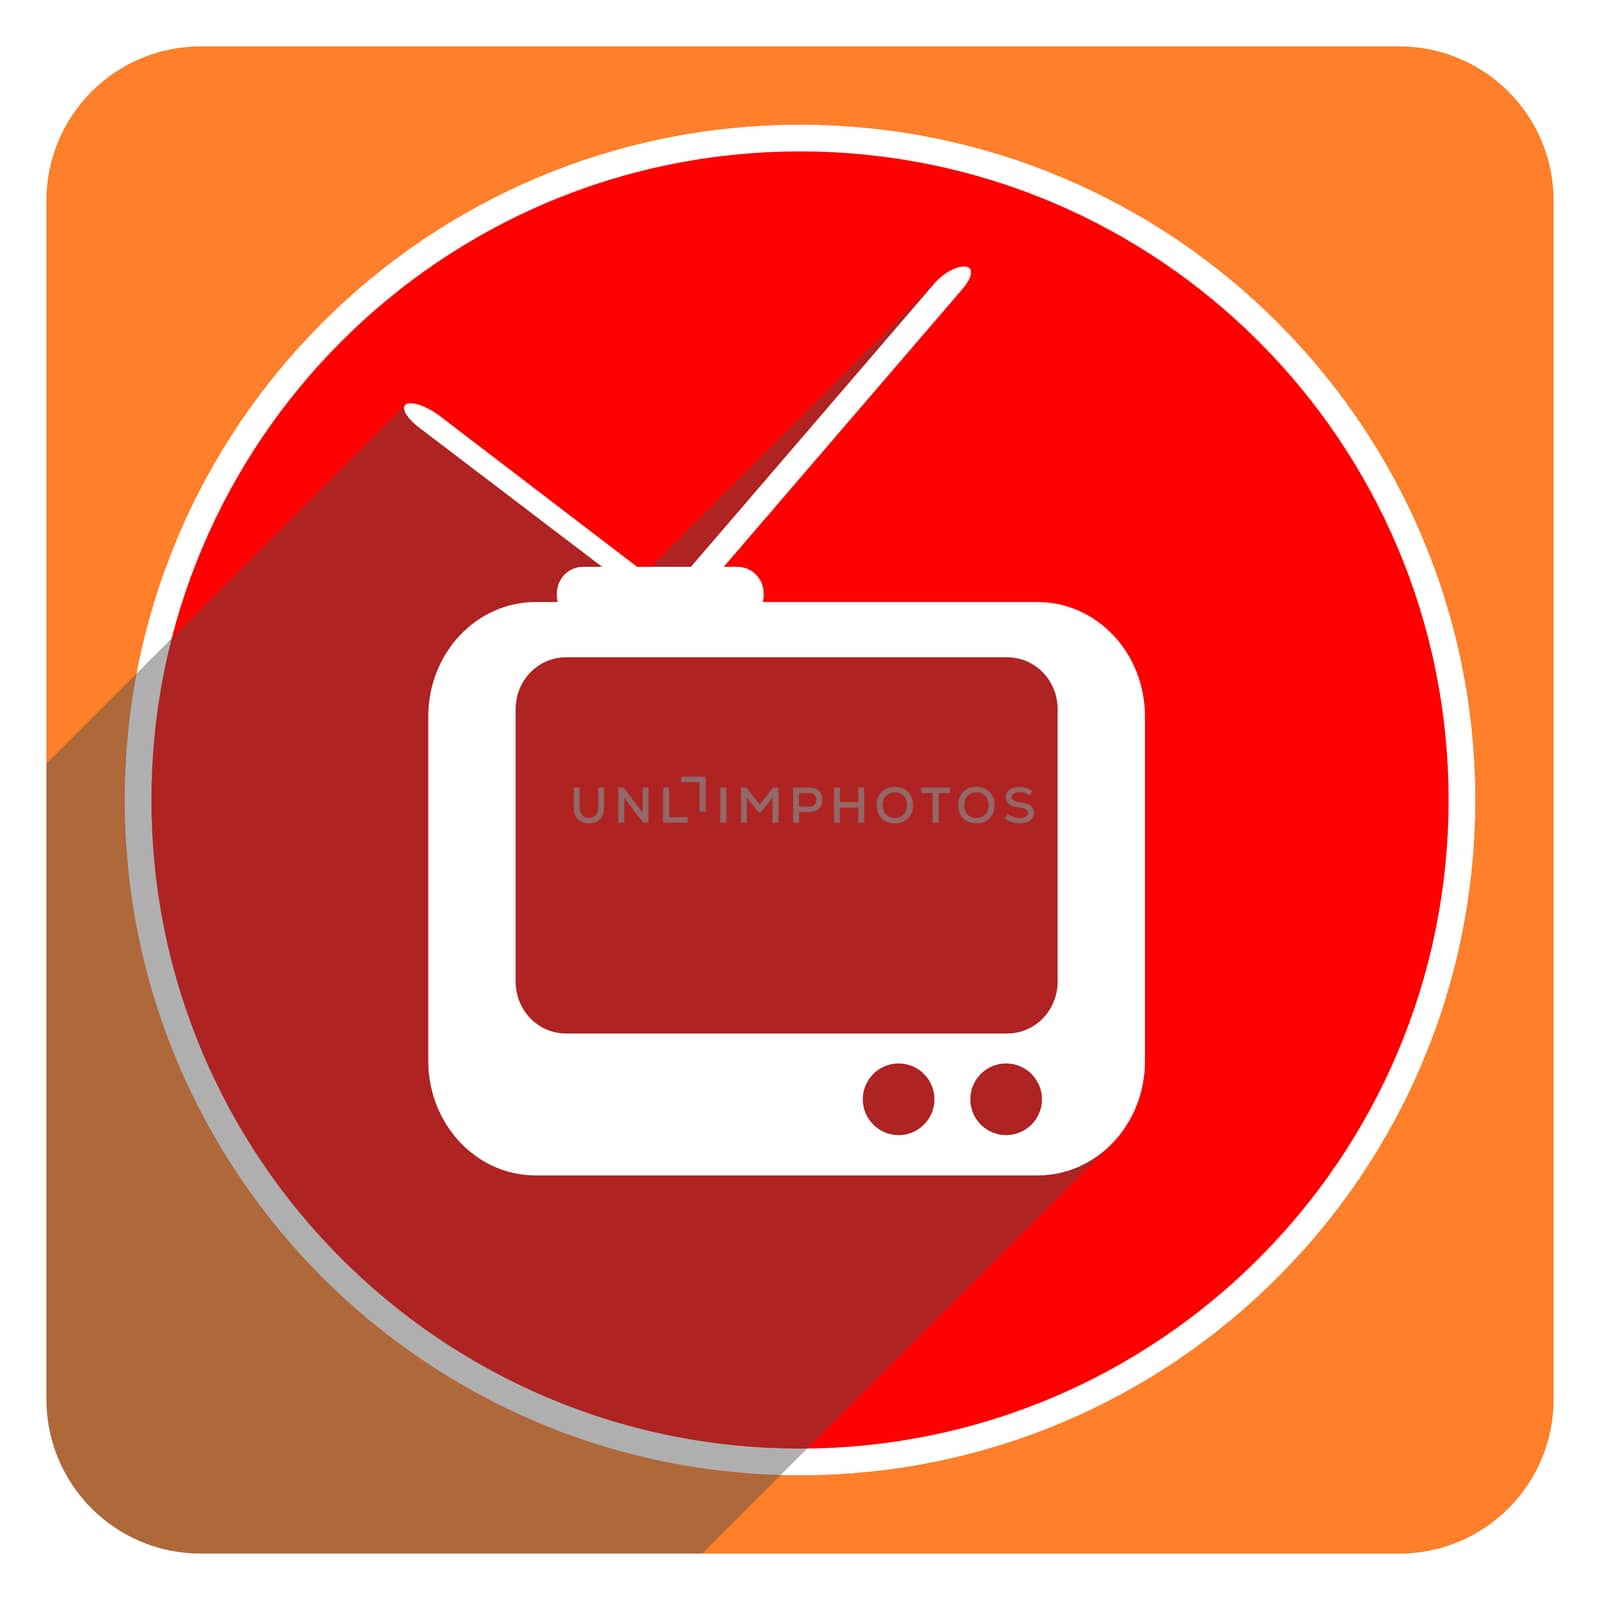 tv red flat icon isolated